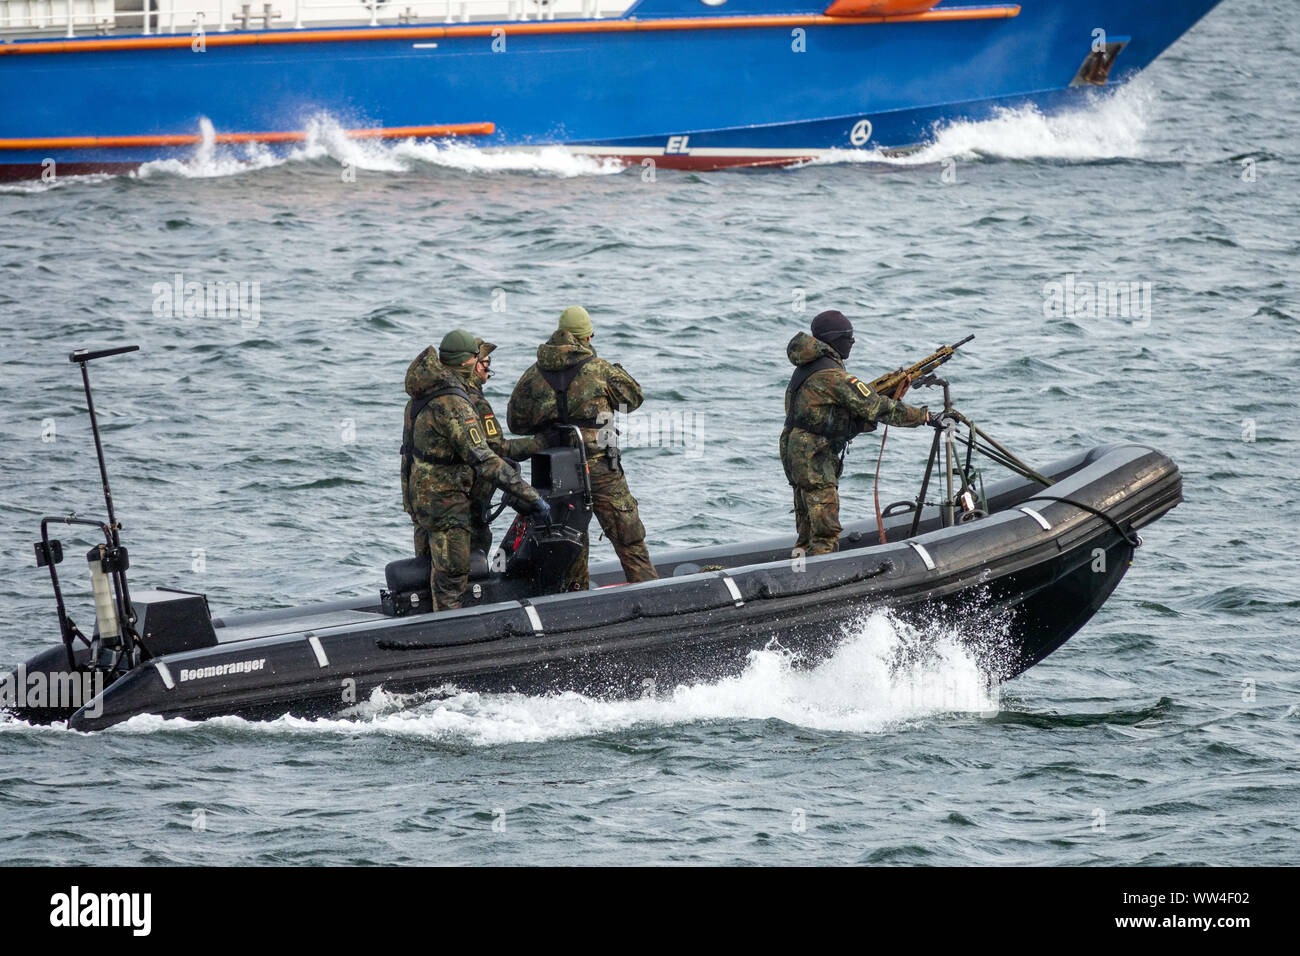 Special naval forces of the German Navy in action, Baltic Sea Rostock Germany German marine troops Stock Photo